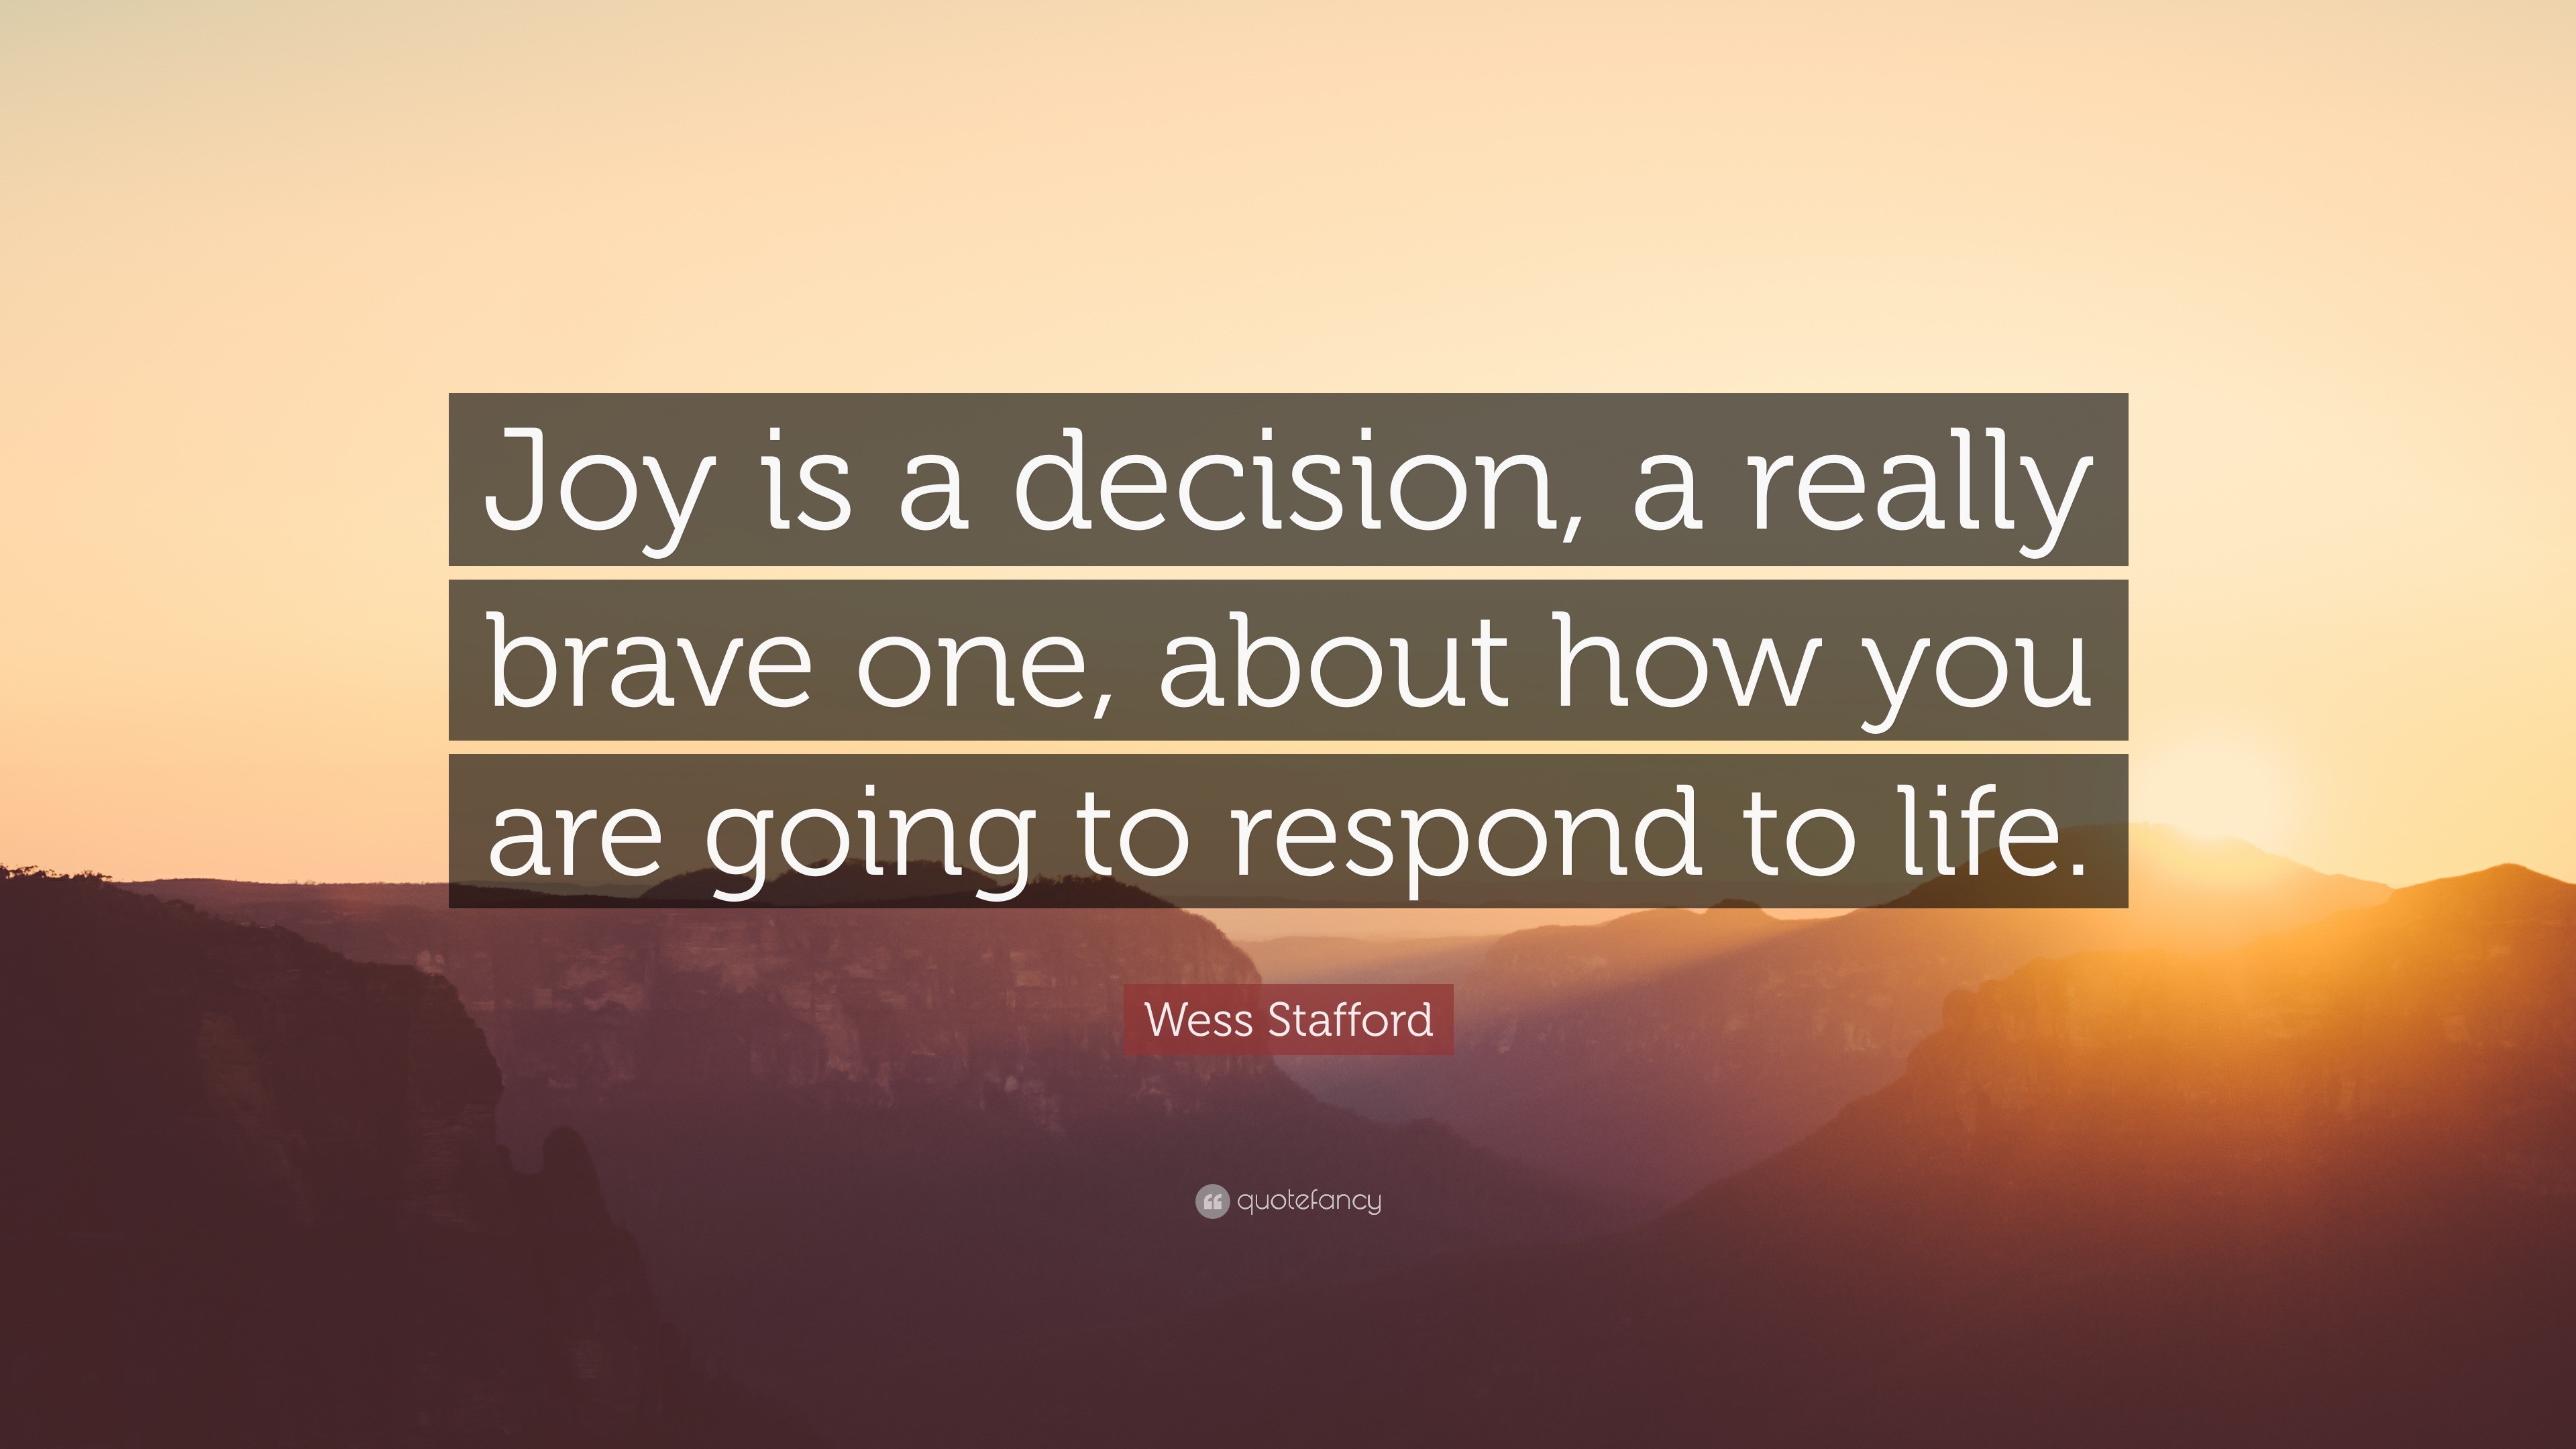 Find Joy and Make Brave Decisions - Wess Stafford